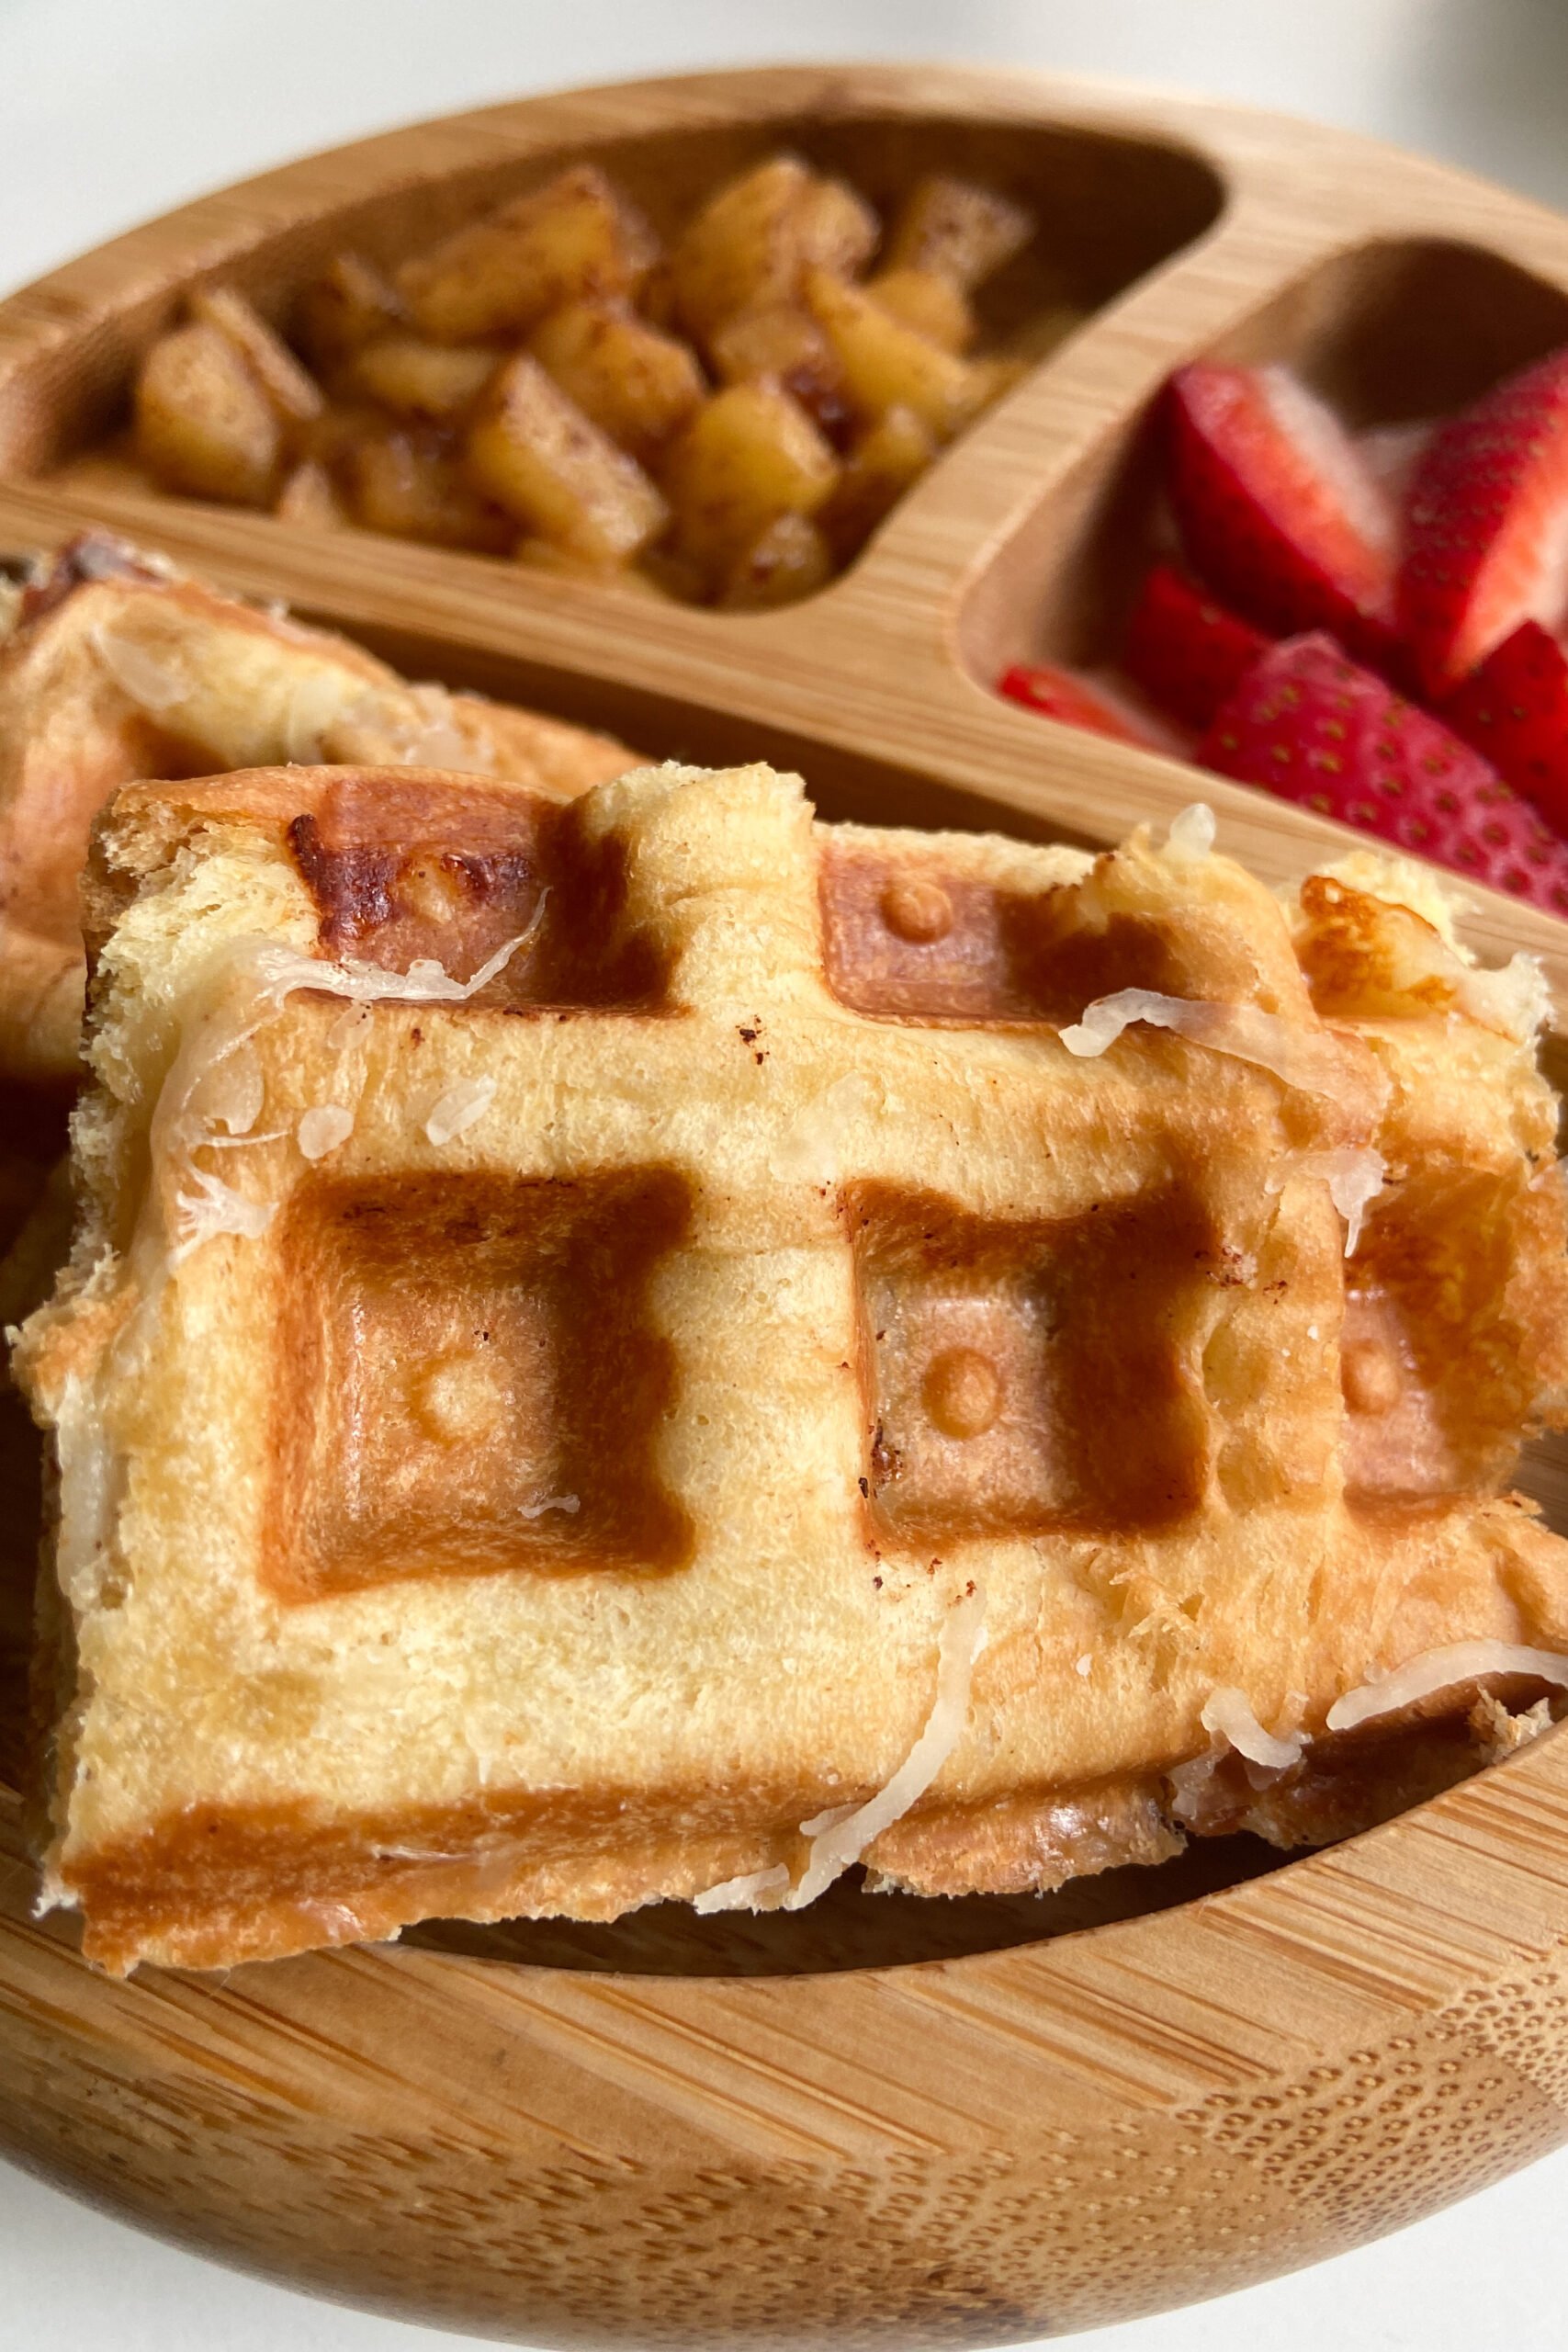 Waffle sandwich served with fruits